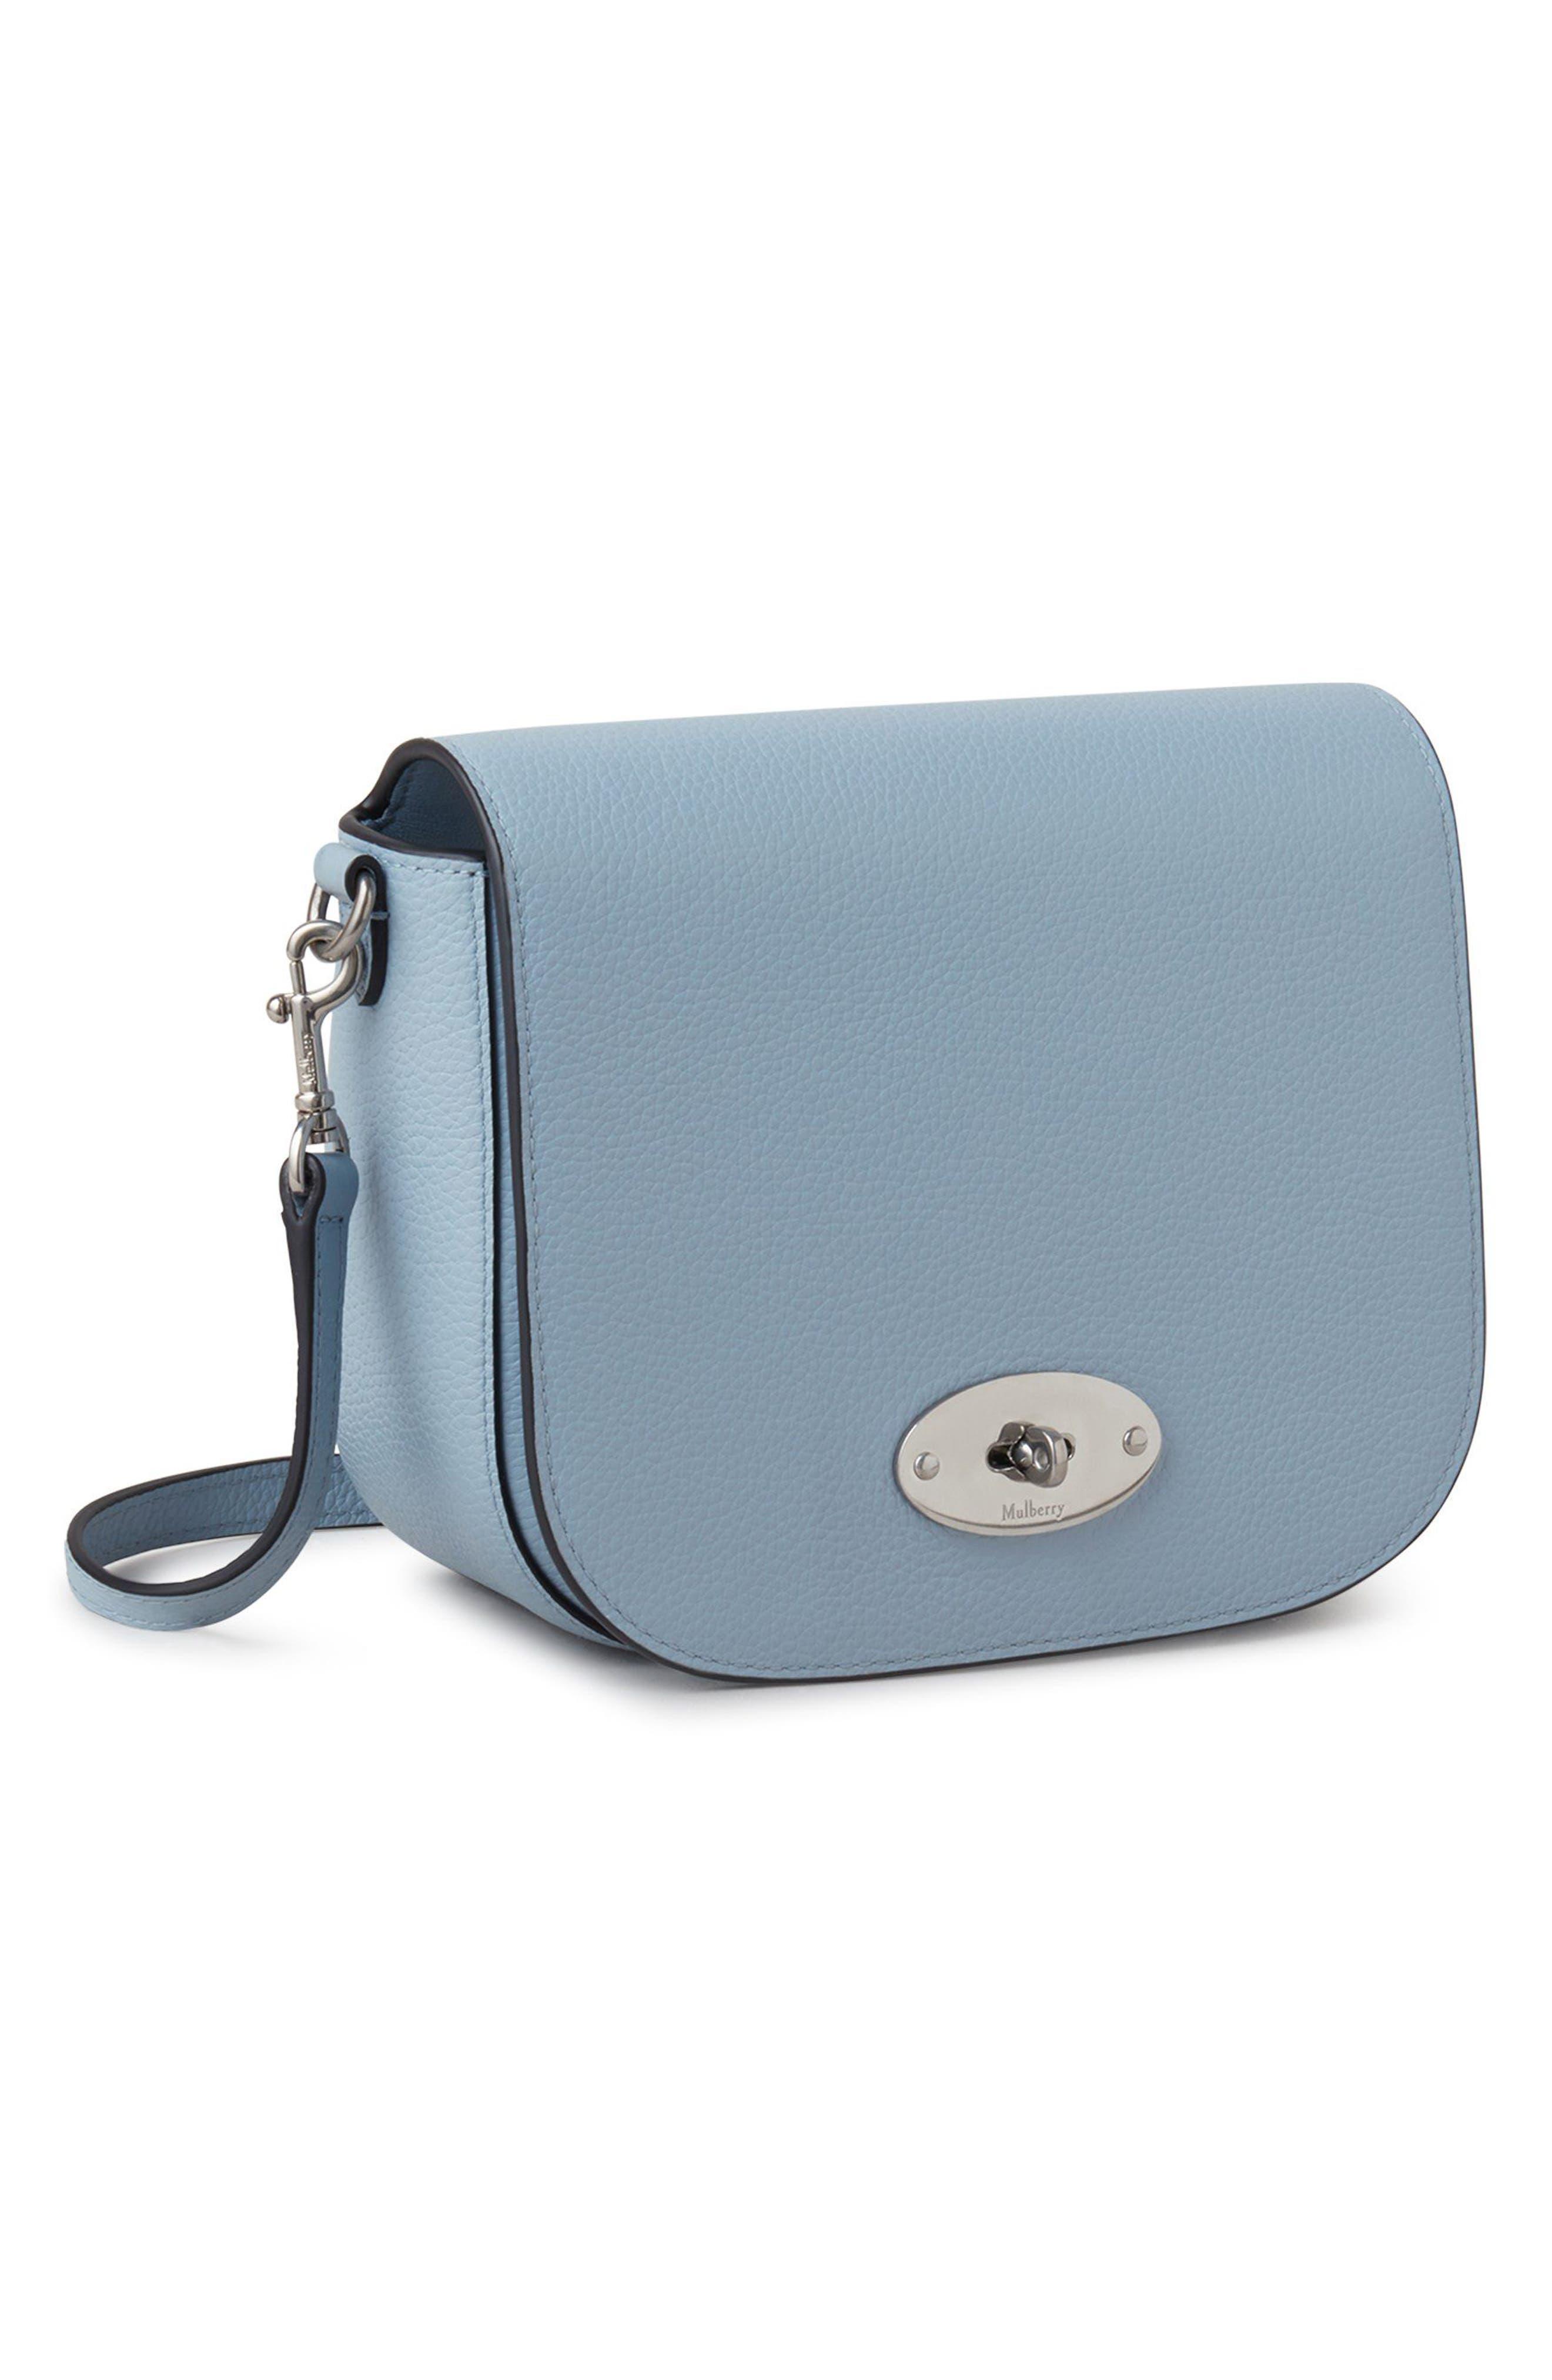 Mulberry Small Darley Leather Crossbody Bag in Blue